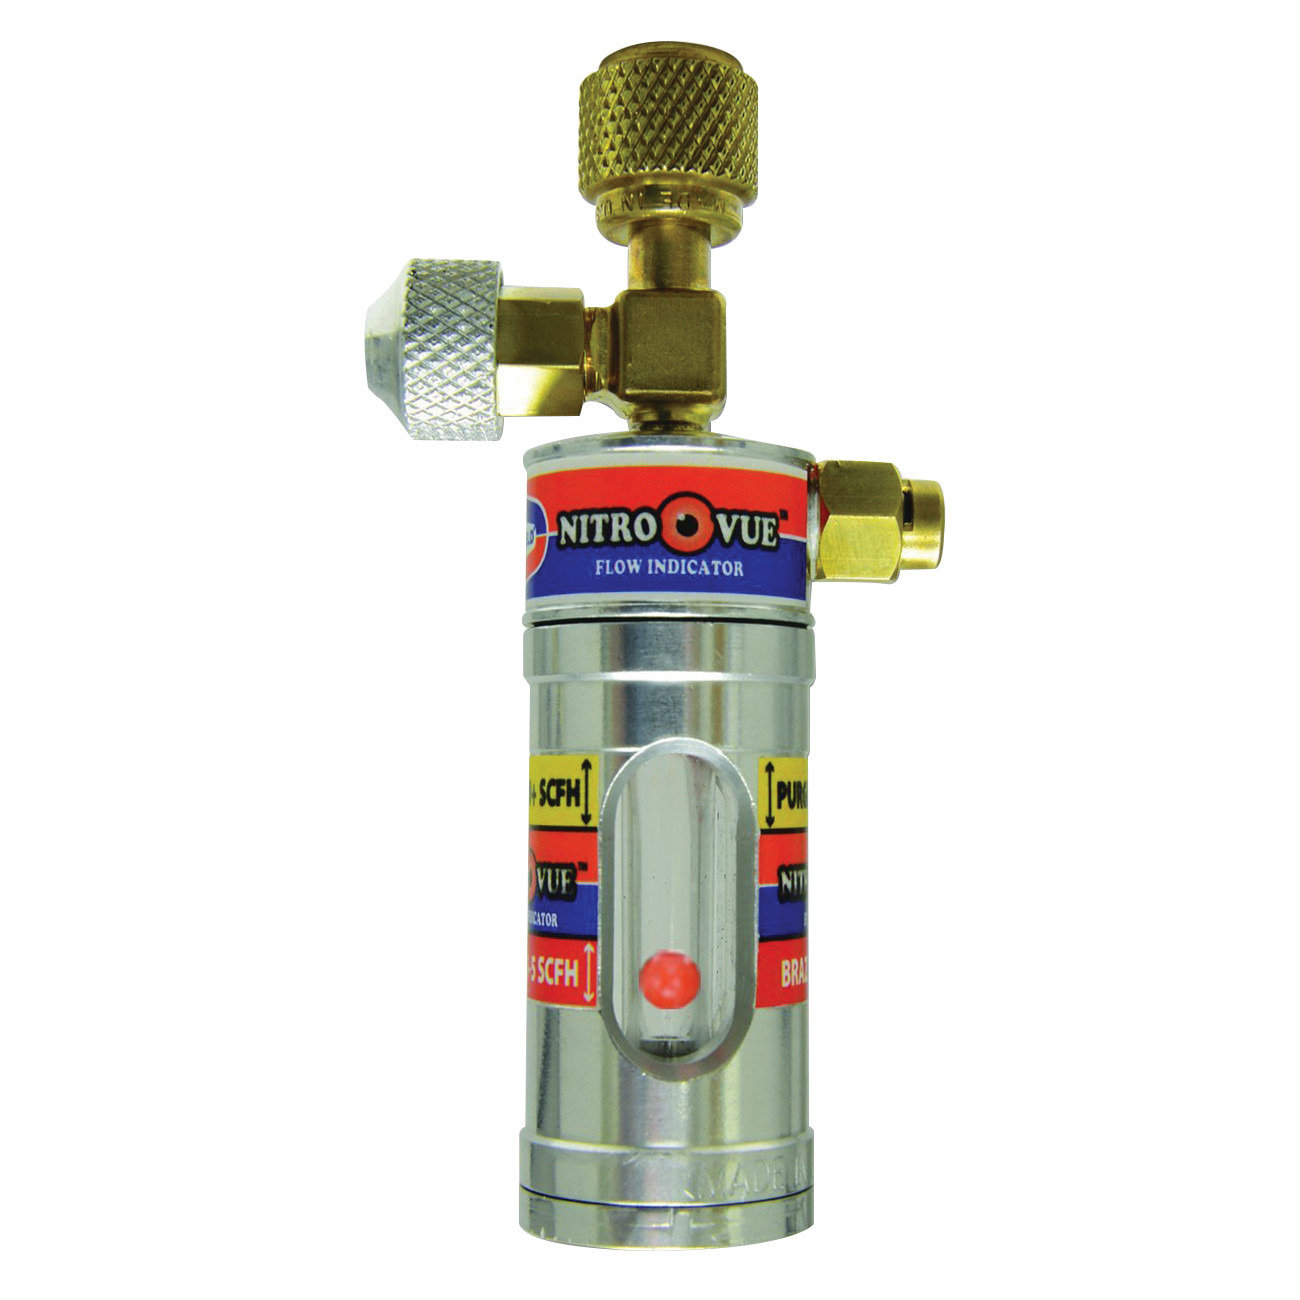 UNIWELD® Nitrovue NV1 Nitrogen Flow Indicator, 1/4 in Fitting, Female Flared CGA Inlet x Male Flared Outlet Connection